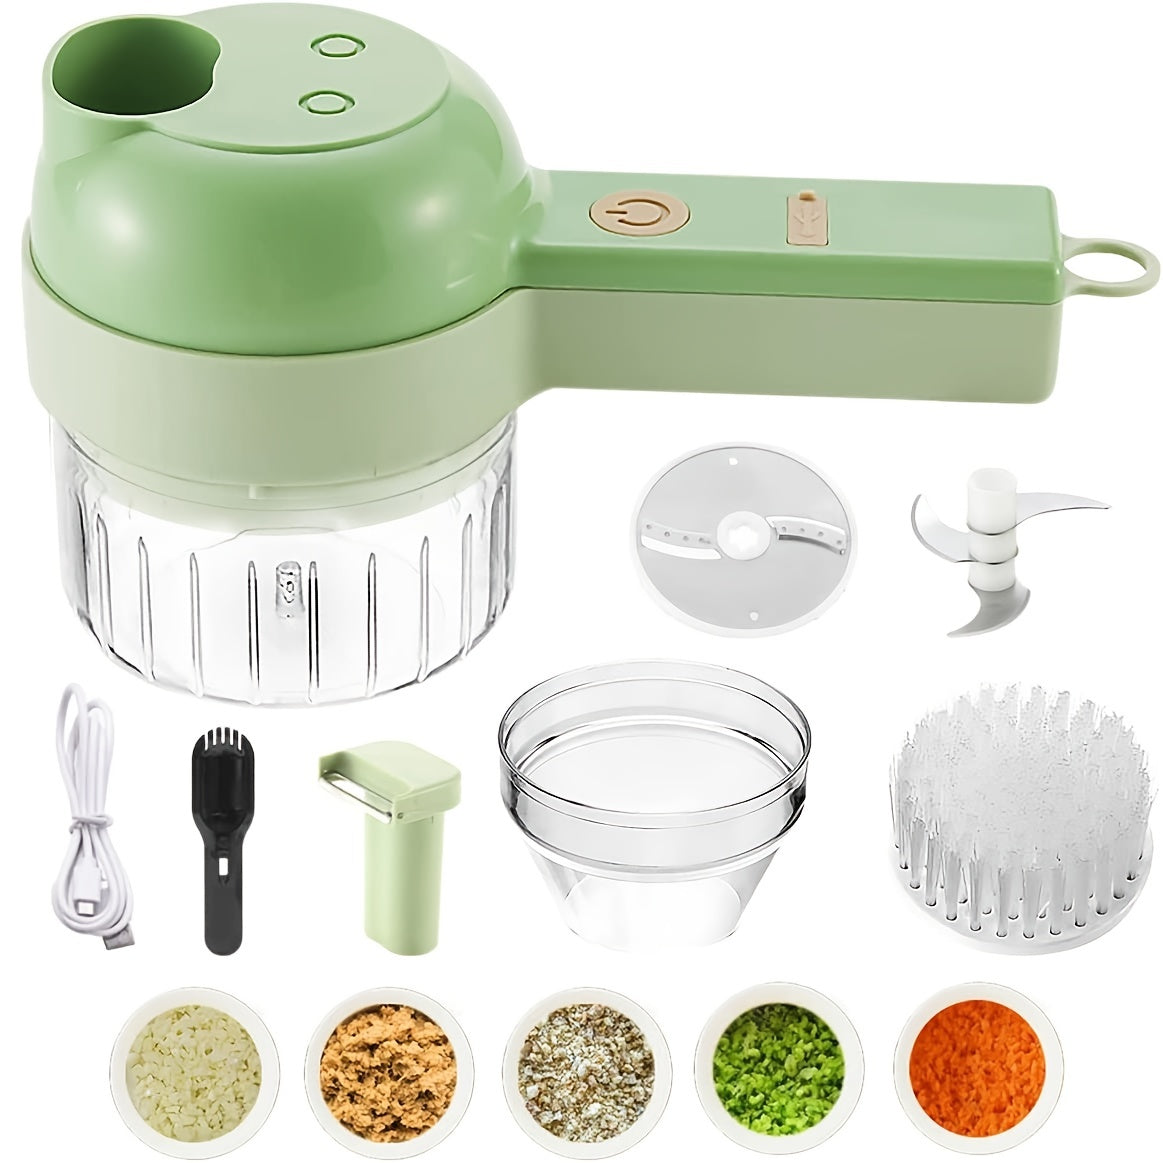 Vegetable Chopper - Handheld Electric Vegetable Chopper Electric Mini Food Processor with Brush